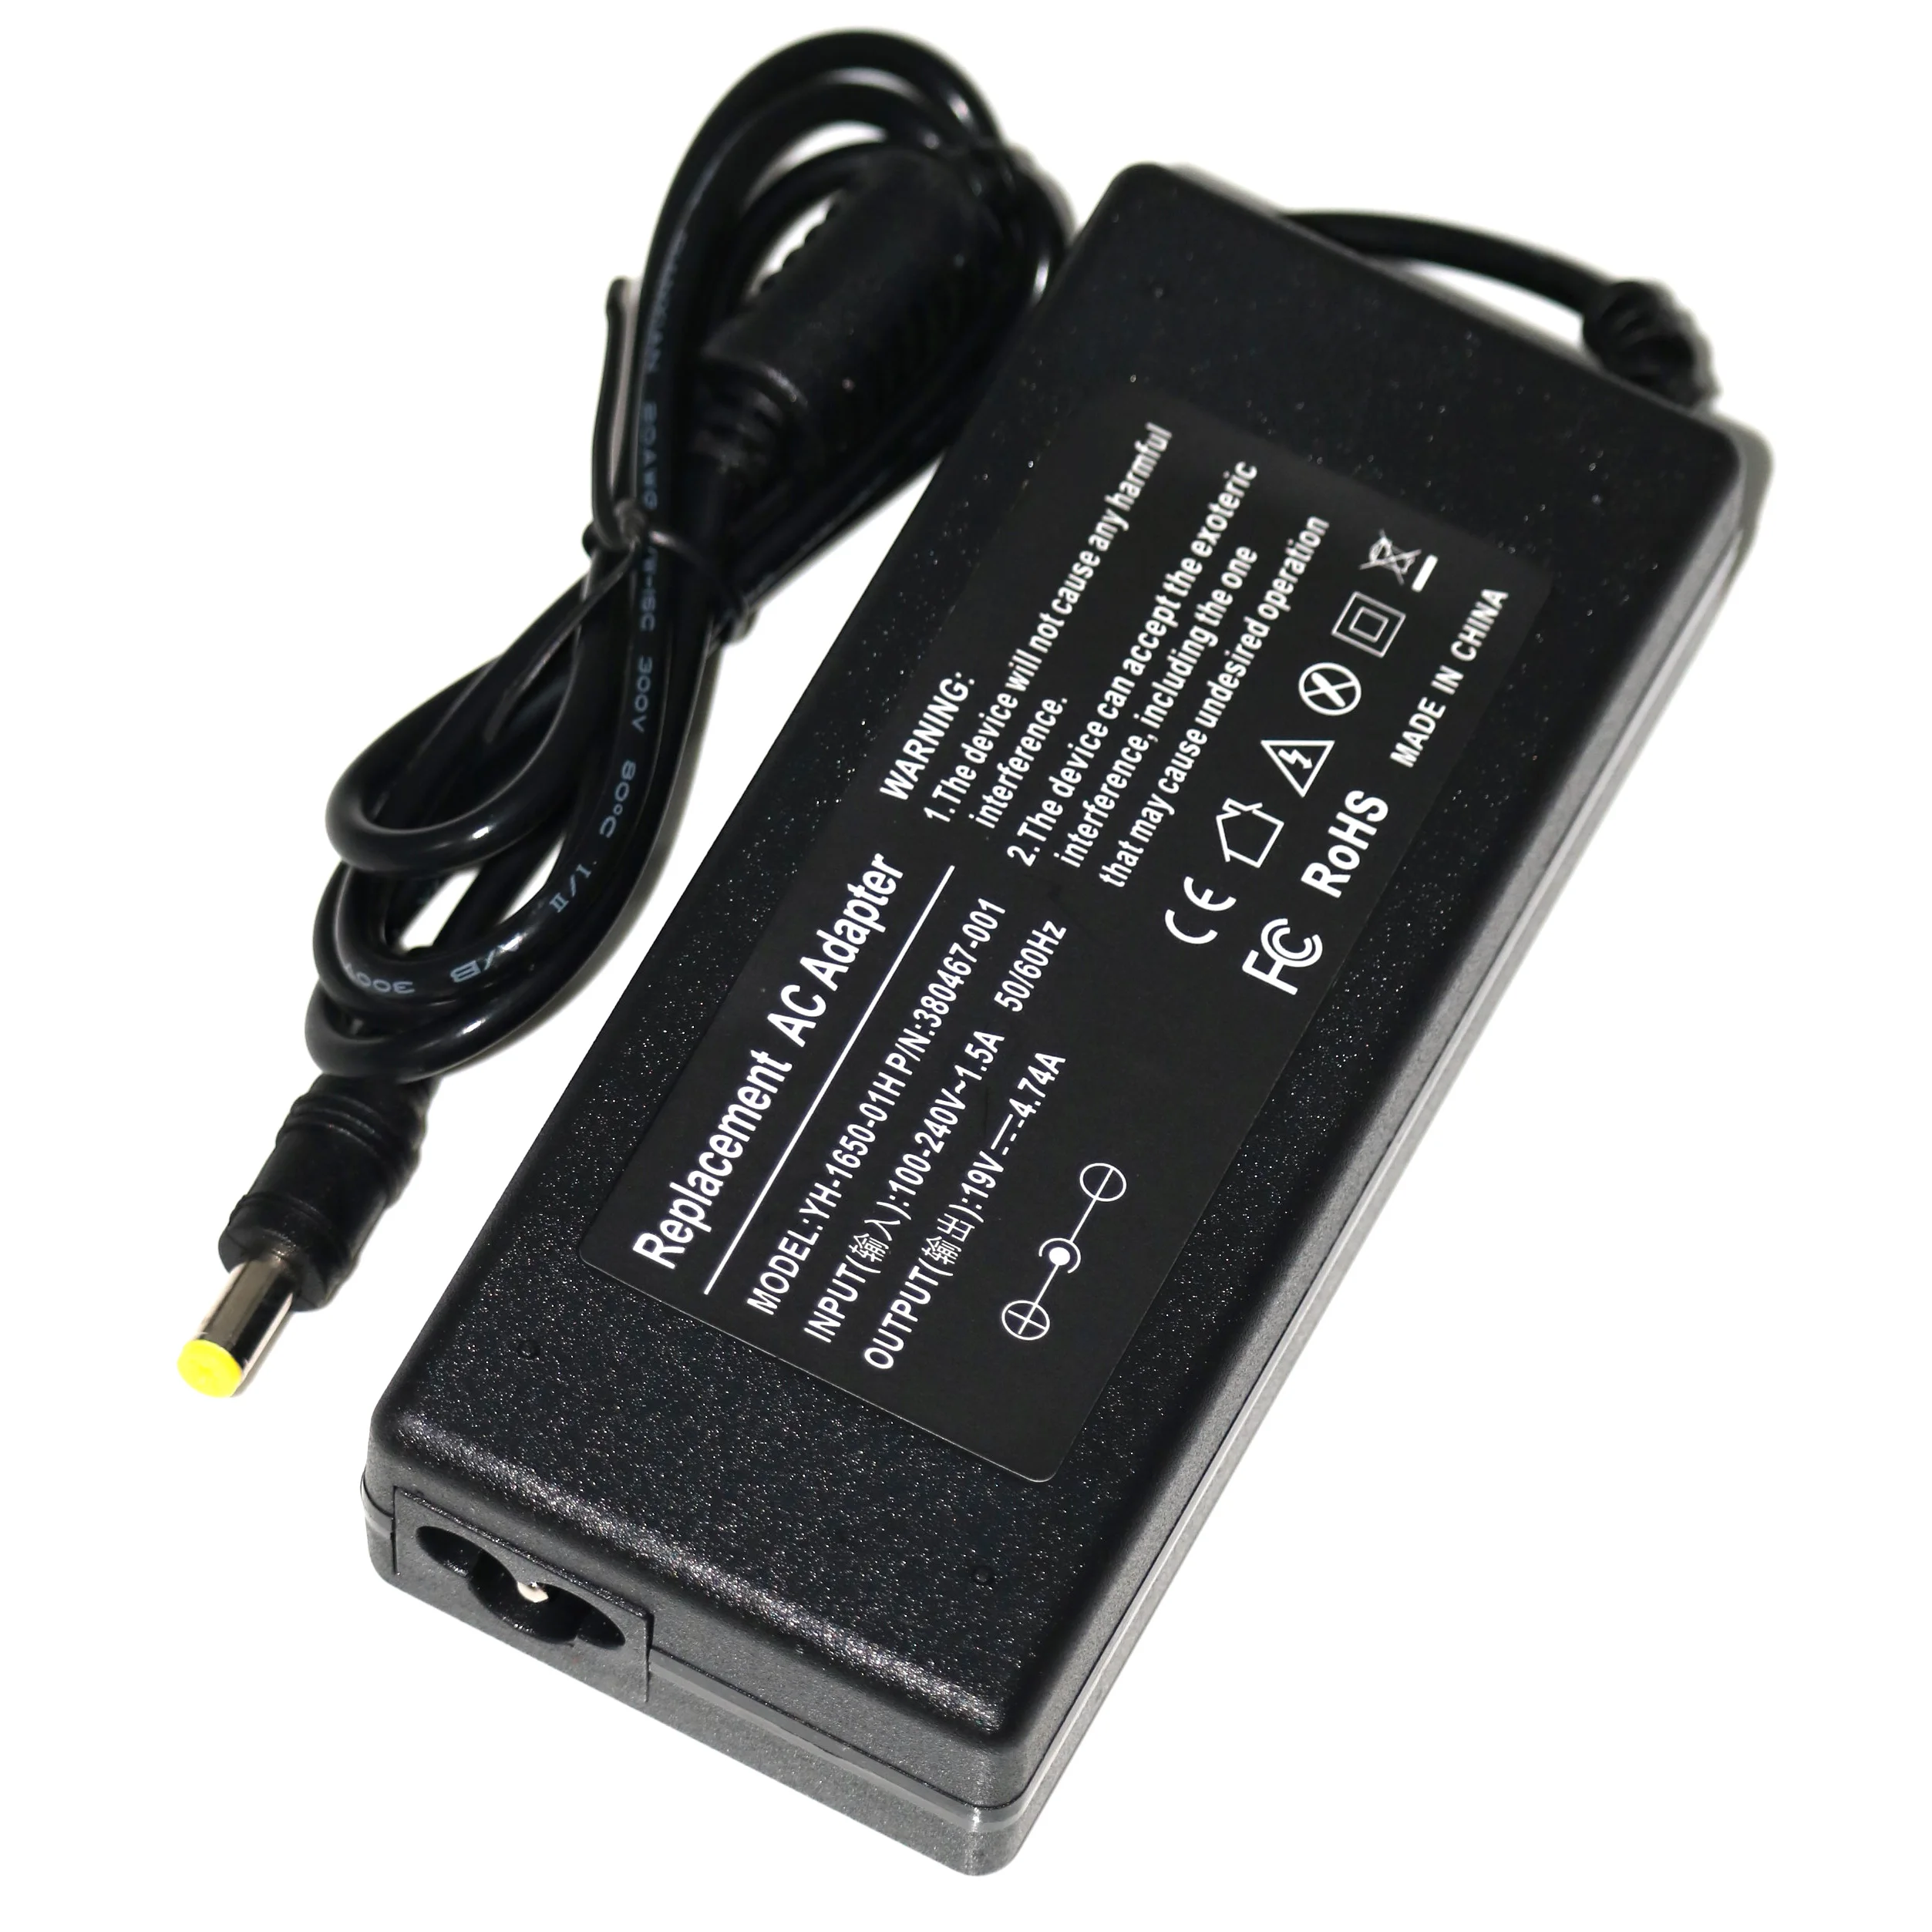 

90W Laptop Adapter Power Supply Cord For Acer Aspire 5750 5750G 5755 5755G 6920 6920G 6930G Notebook Battery Charger 19V 4.74A